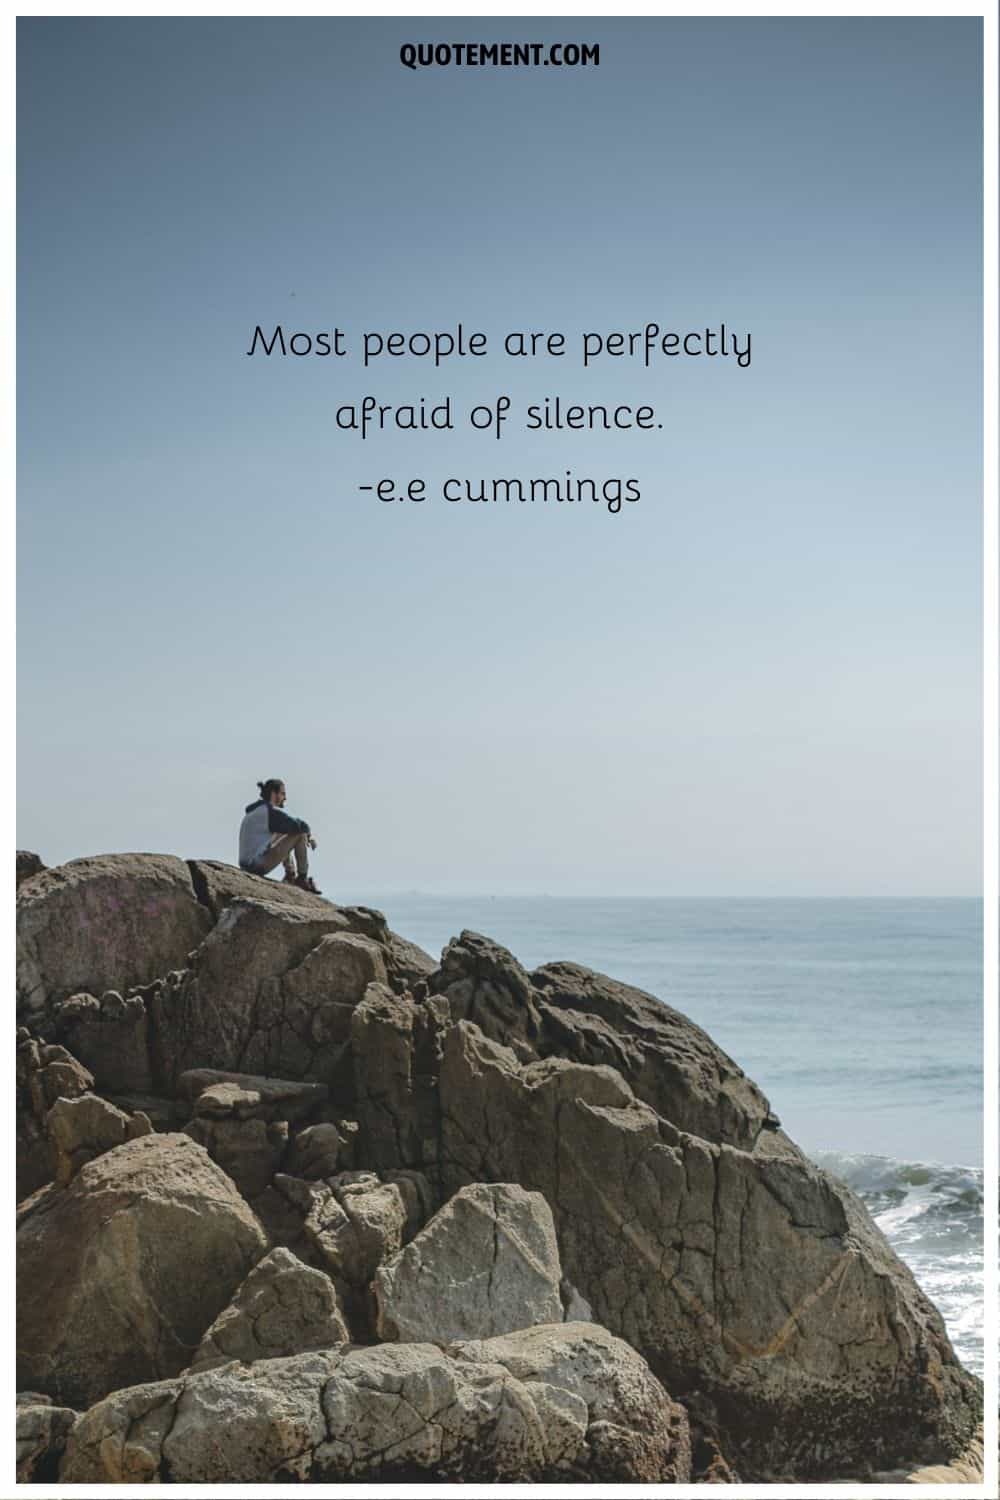 “Most people are perfectly afraid of silence” ― e.e cummings